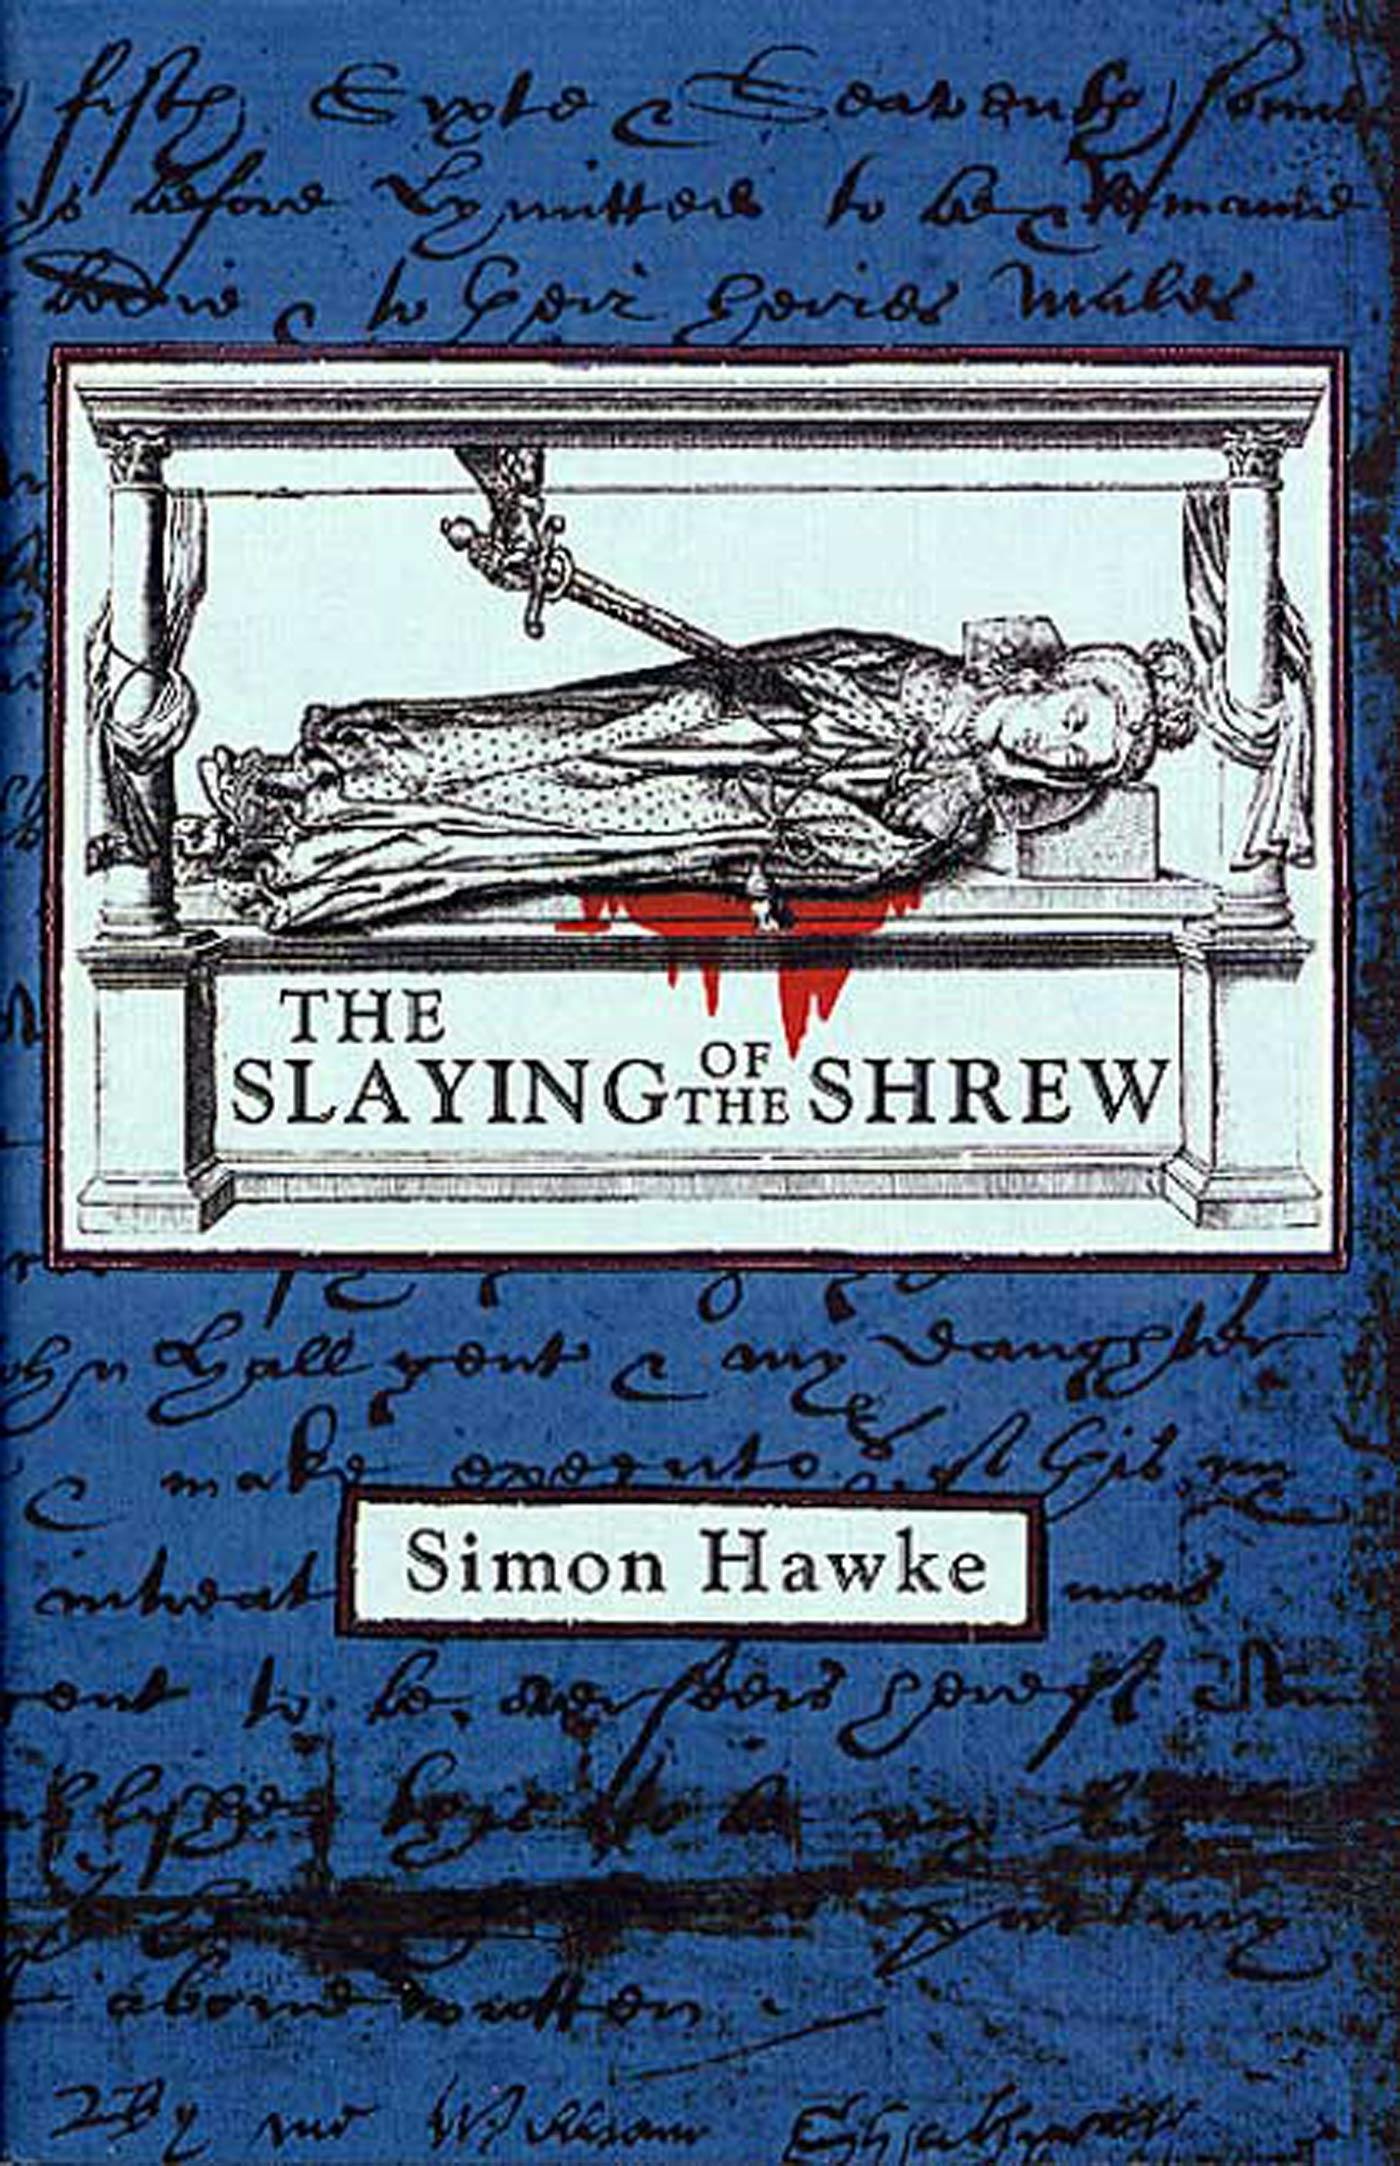 Cover for the book titled as: The Slaying of the Shrew